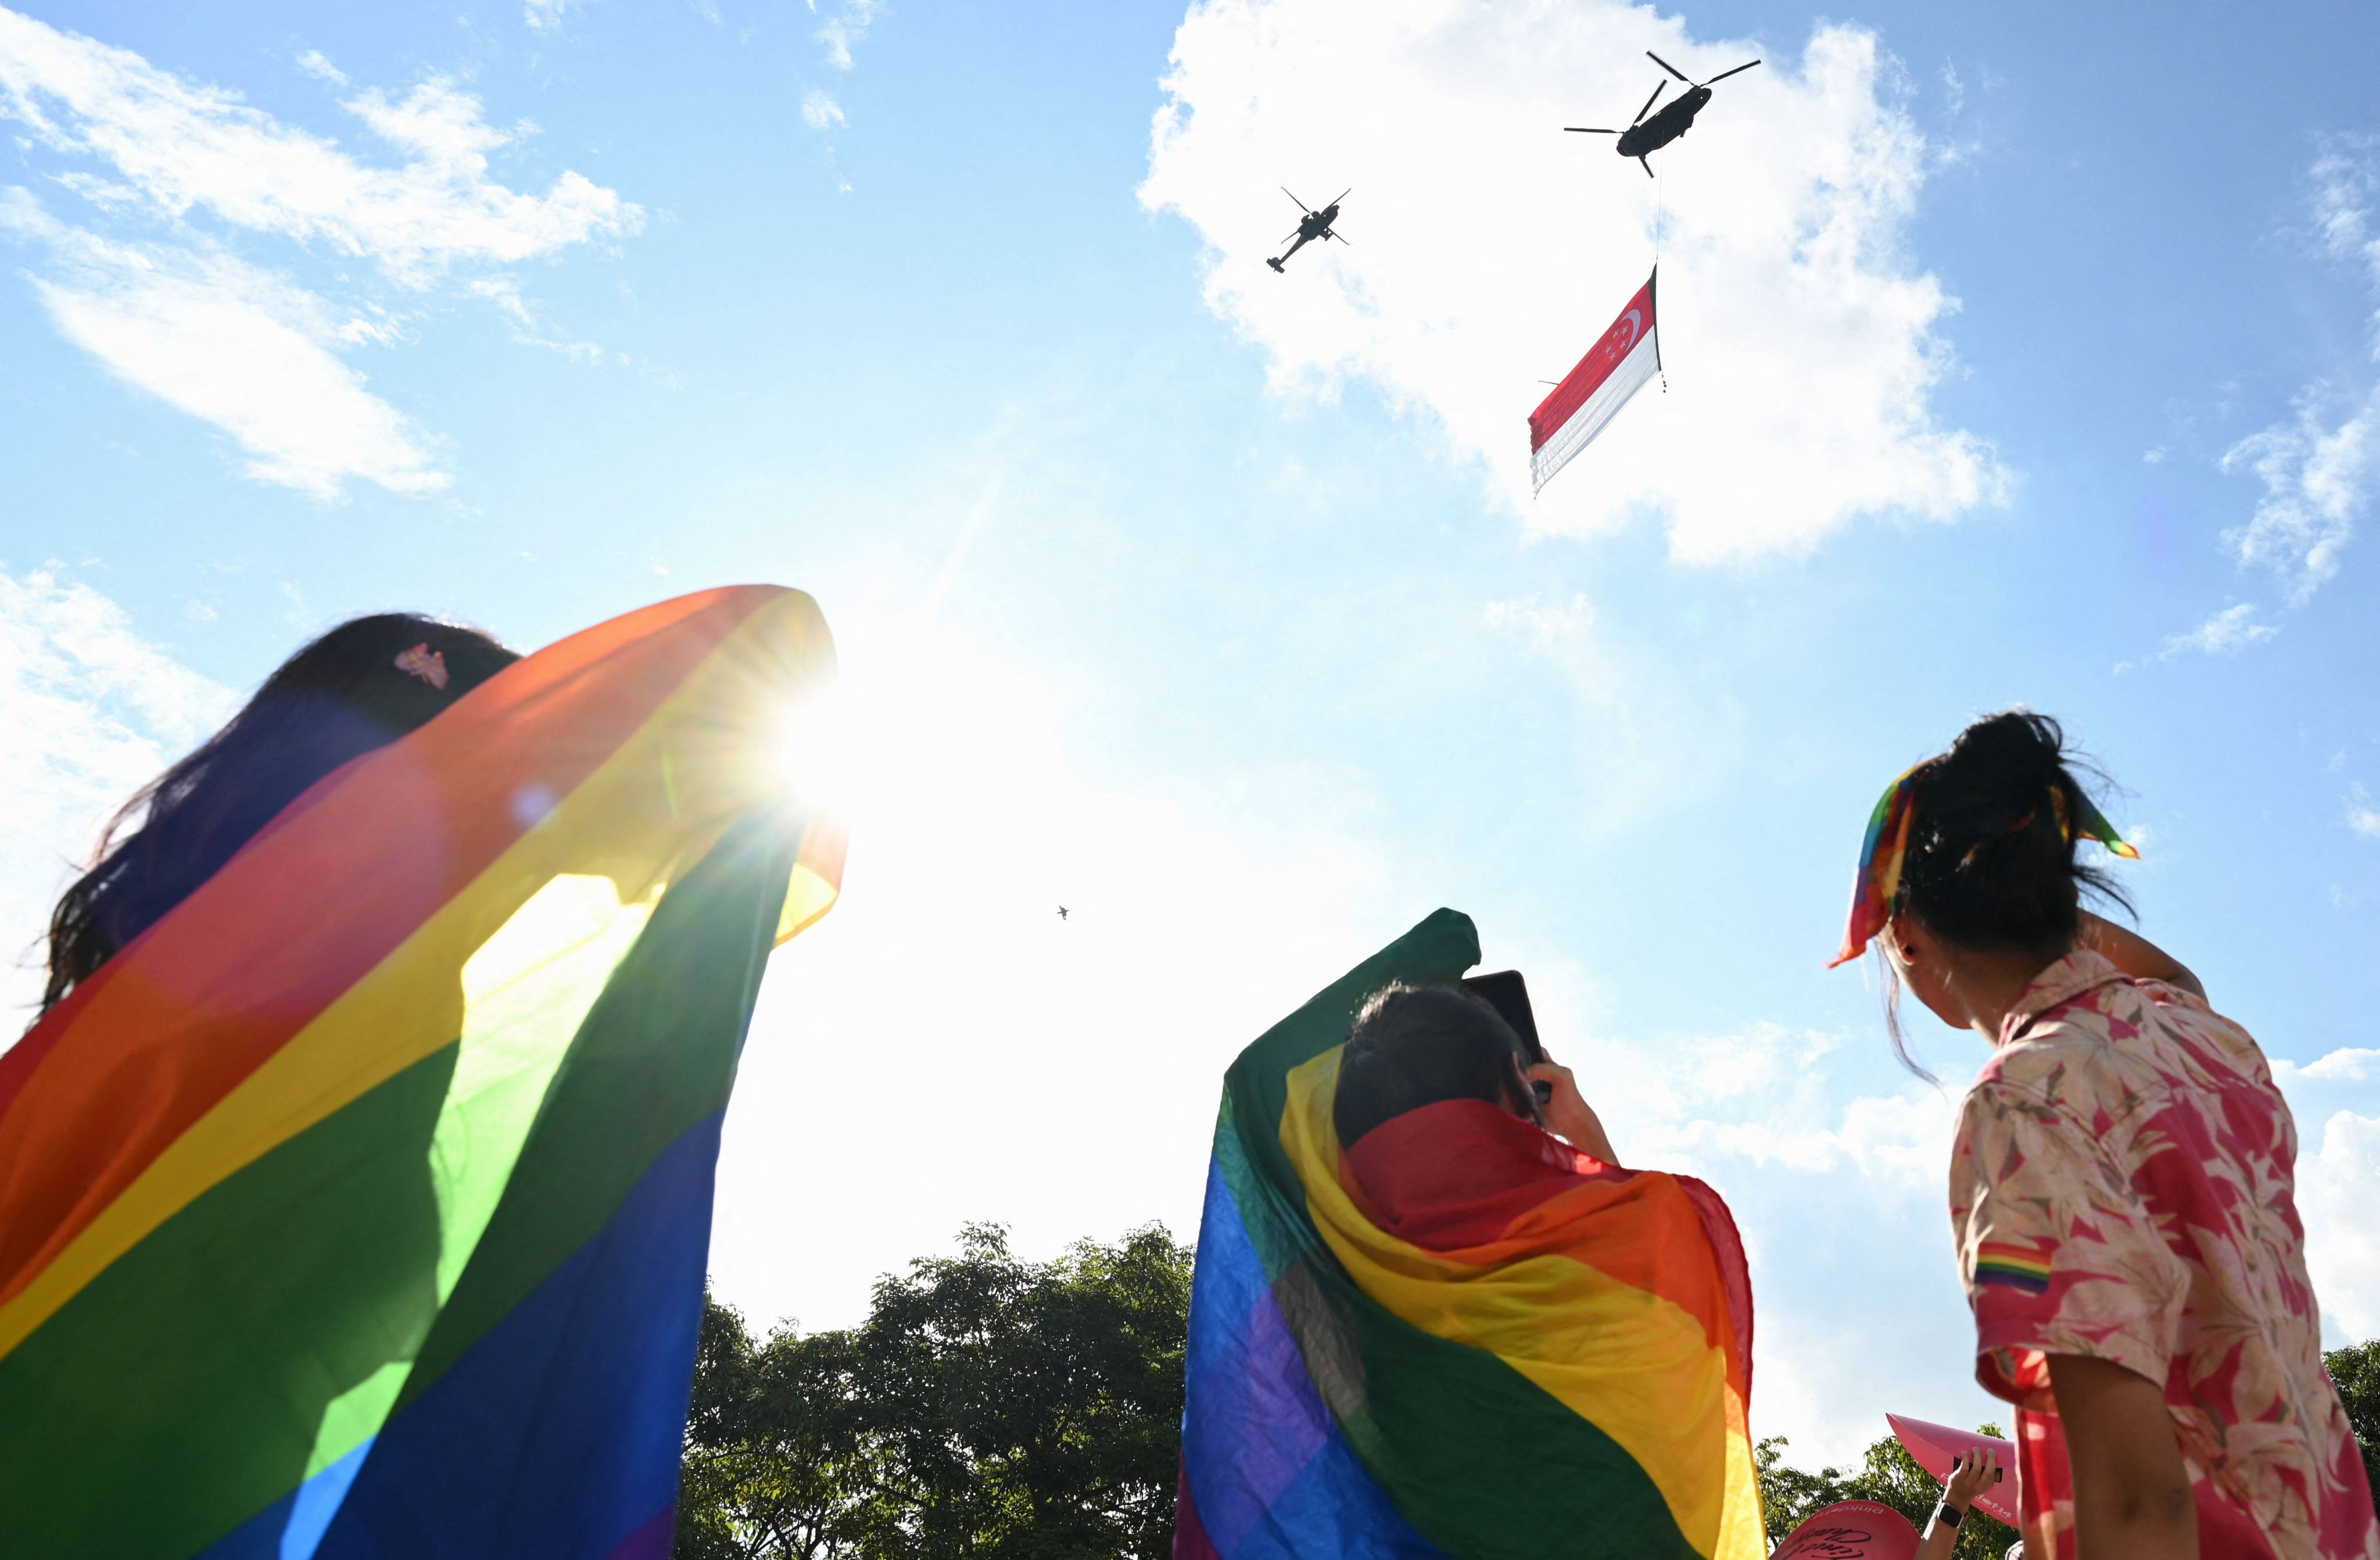 Supporters attend the annual Pink Dot event in a public show of support for the LGBTQ community at Hong Lim Park in Singapore on June 18. Photo: AFP